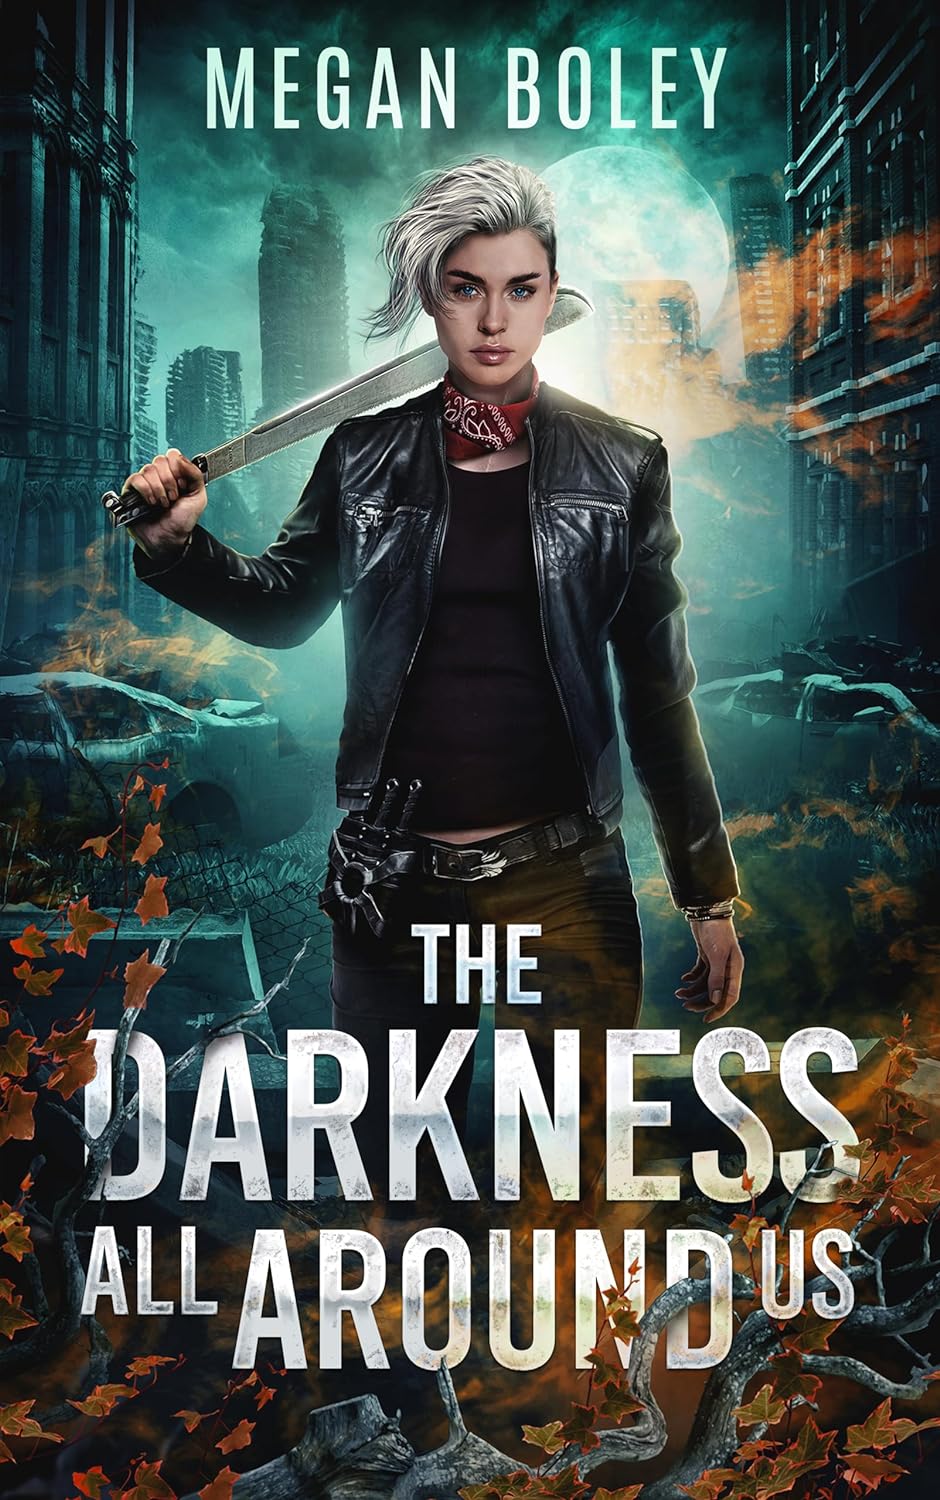 The Darkness All Around Us: A Post Apocalyptic Sci Fi (The Darkness Duology Book 1) by Author Megan Boley